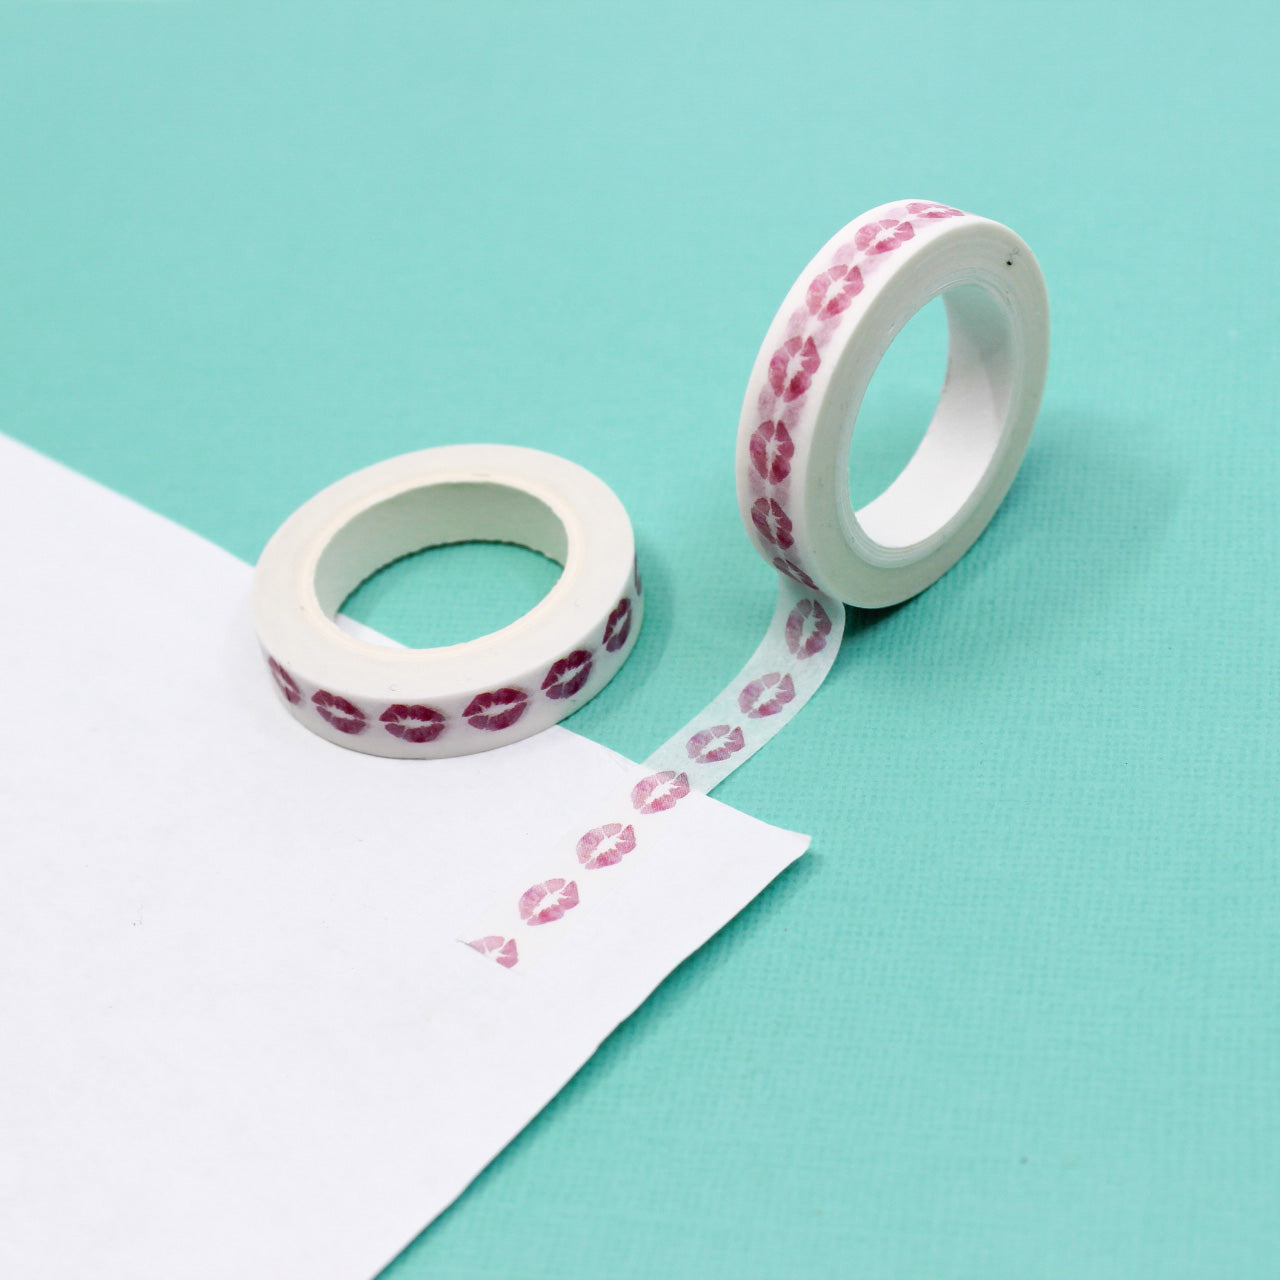 Make a stylish statement with our Pink Lipstick Lips Washi Tape, adorned with a playful lipstick kiss pattern. Ideal for adding a touch of glamour and sass to your projects. This tape is sold at BBB Supplies Craft Shop.